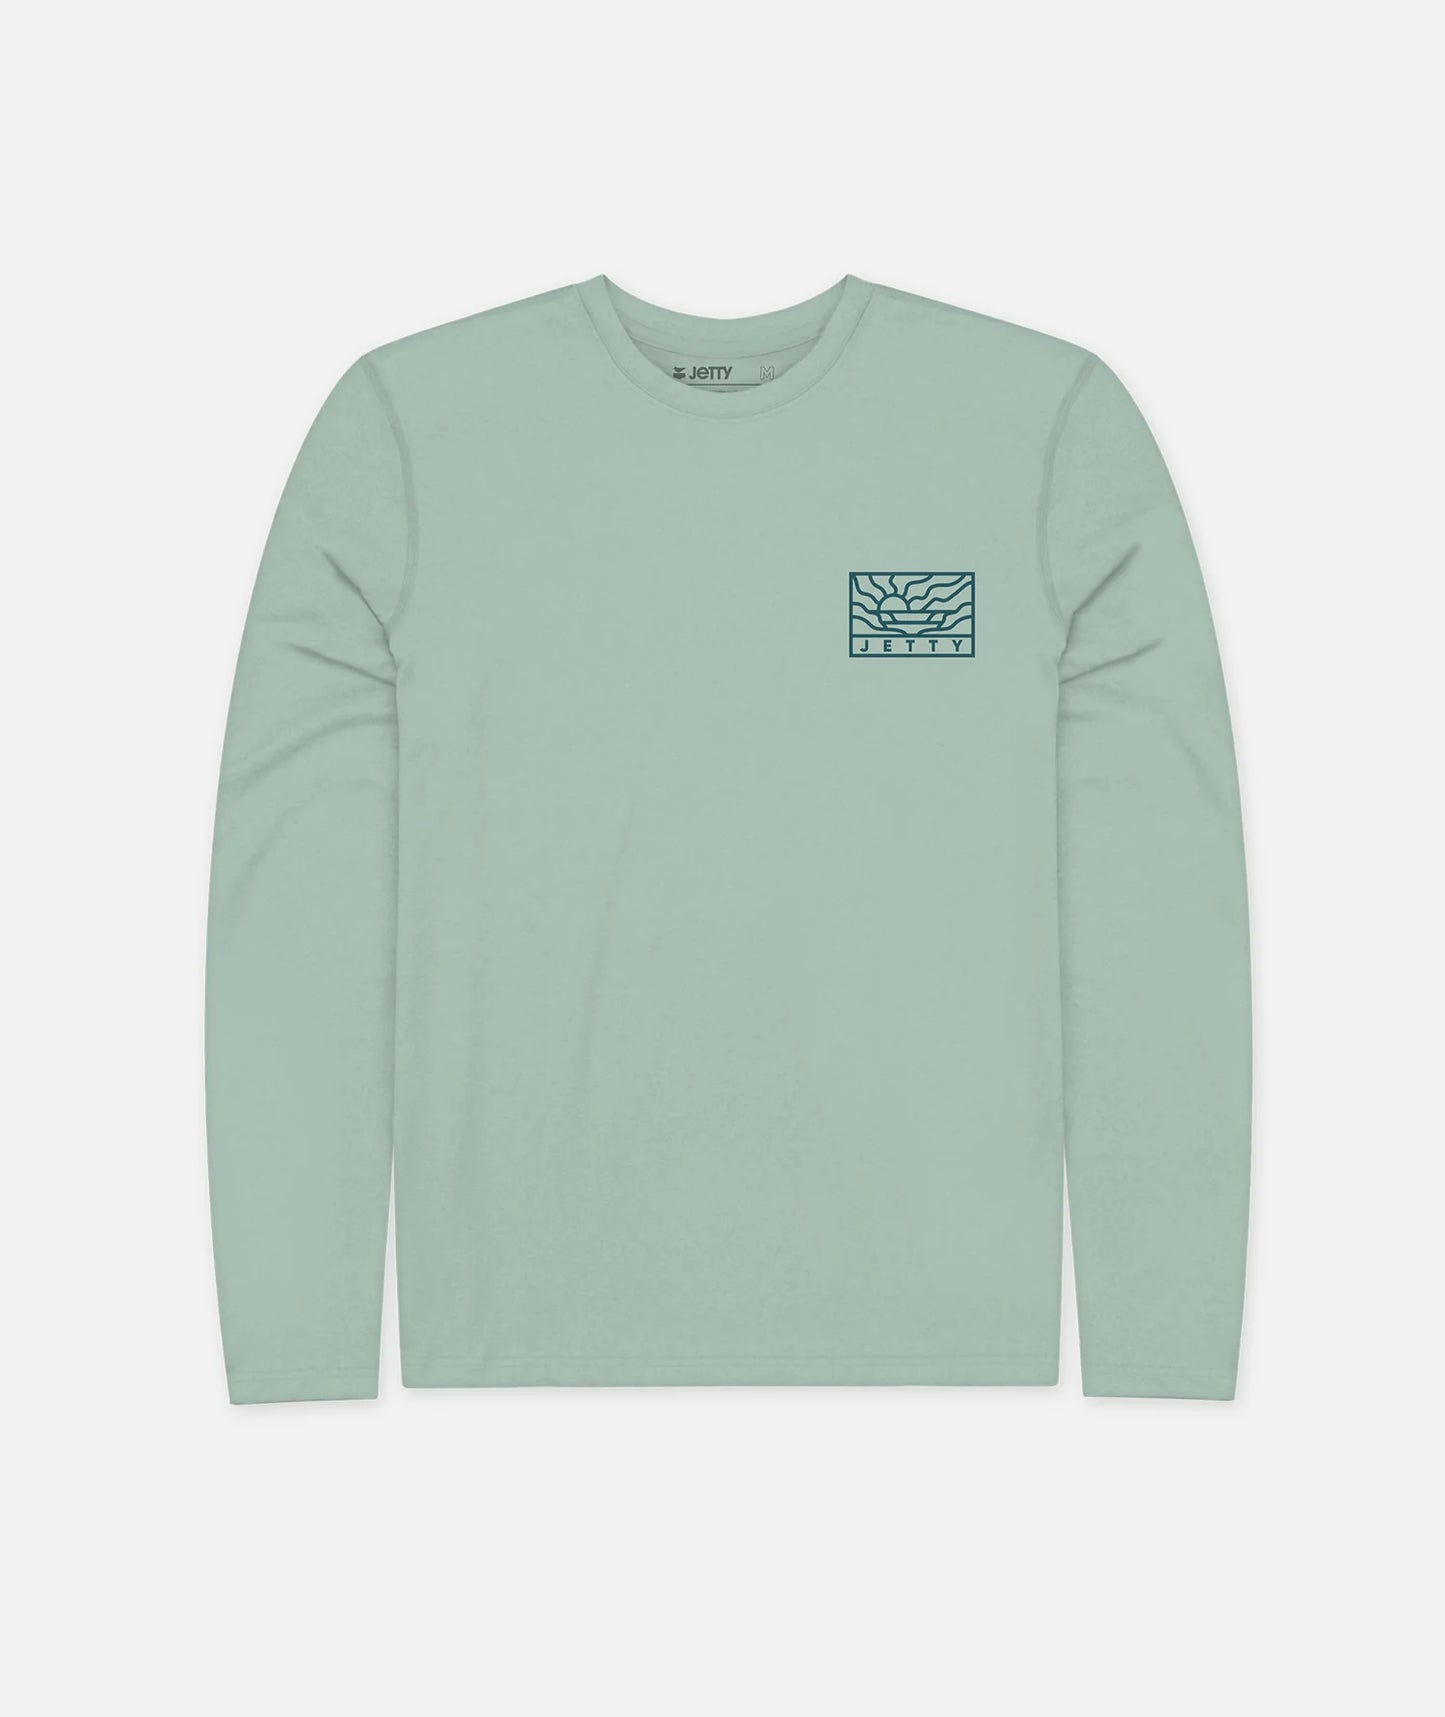 Jetty's Valley UV Long Sleeve Tee in the color Mint